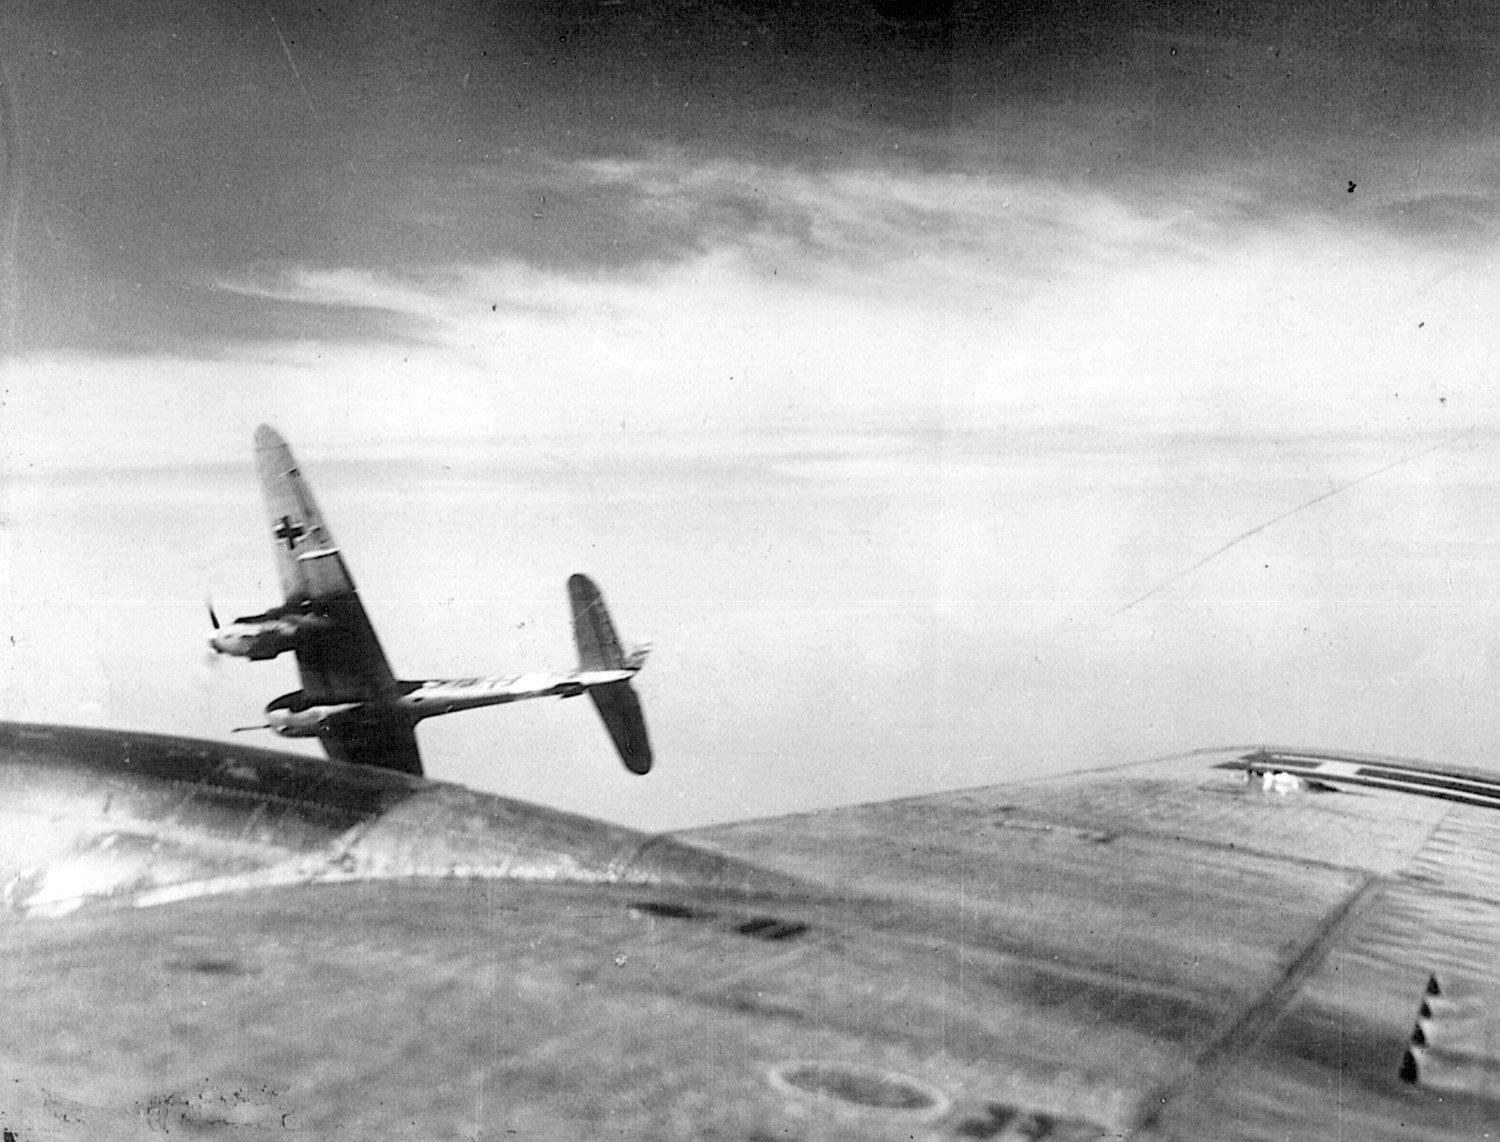 A German fighter, less than 25 feet from a Flying Fortress, banks sharply away from the American bomber after pressing home its attack on June 21, 1944. Luftwaffe pilots flew countless sorties against the big bombers, which rained death and destruction on major German cities.